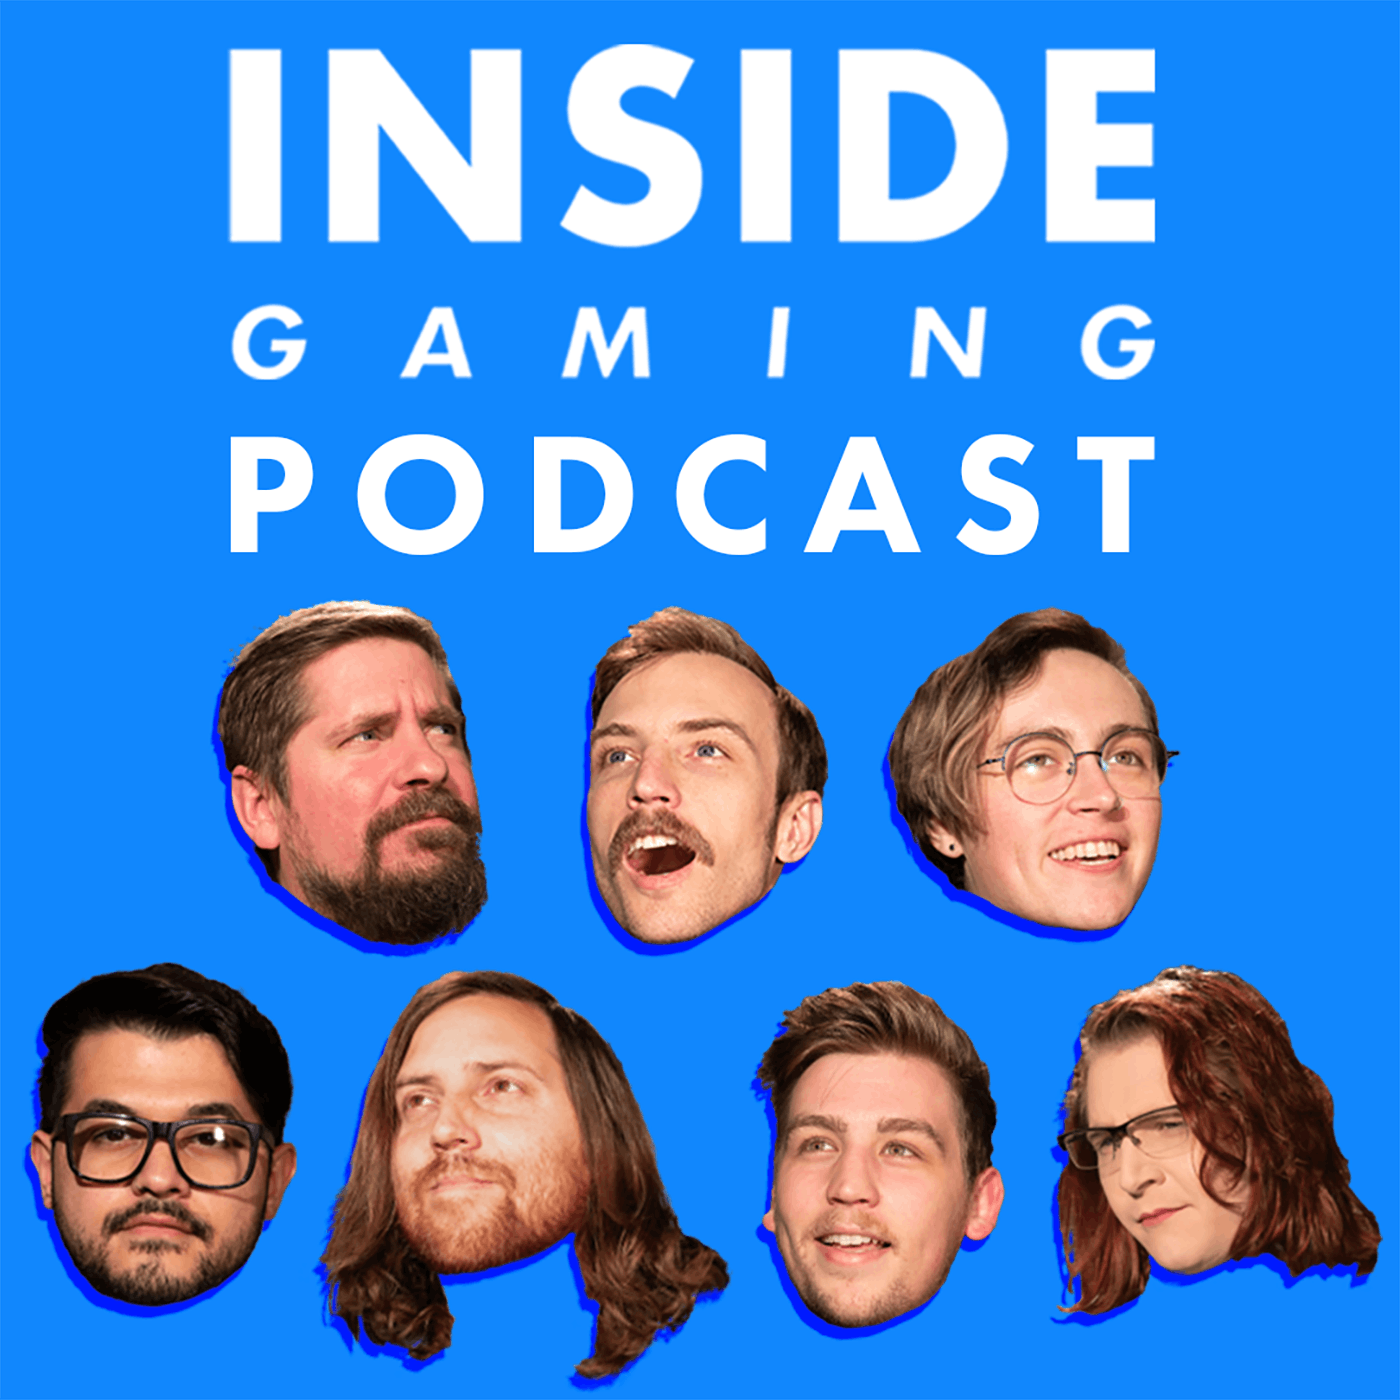 Inside Gaming Podcast